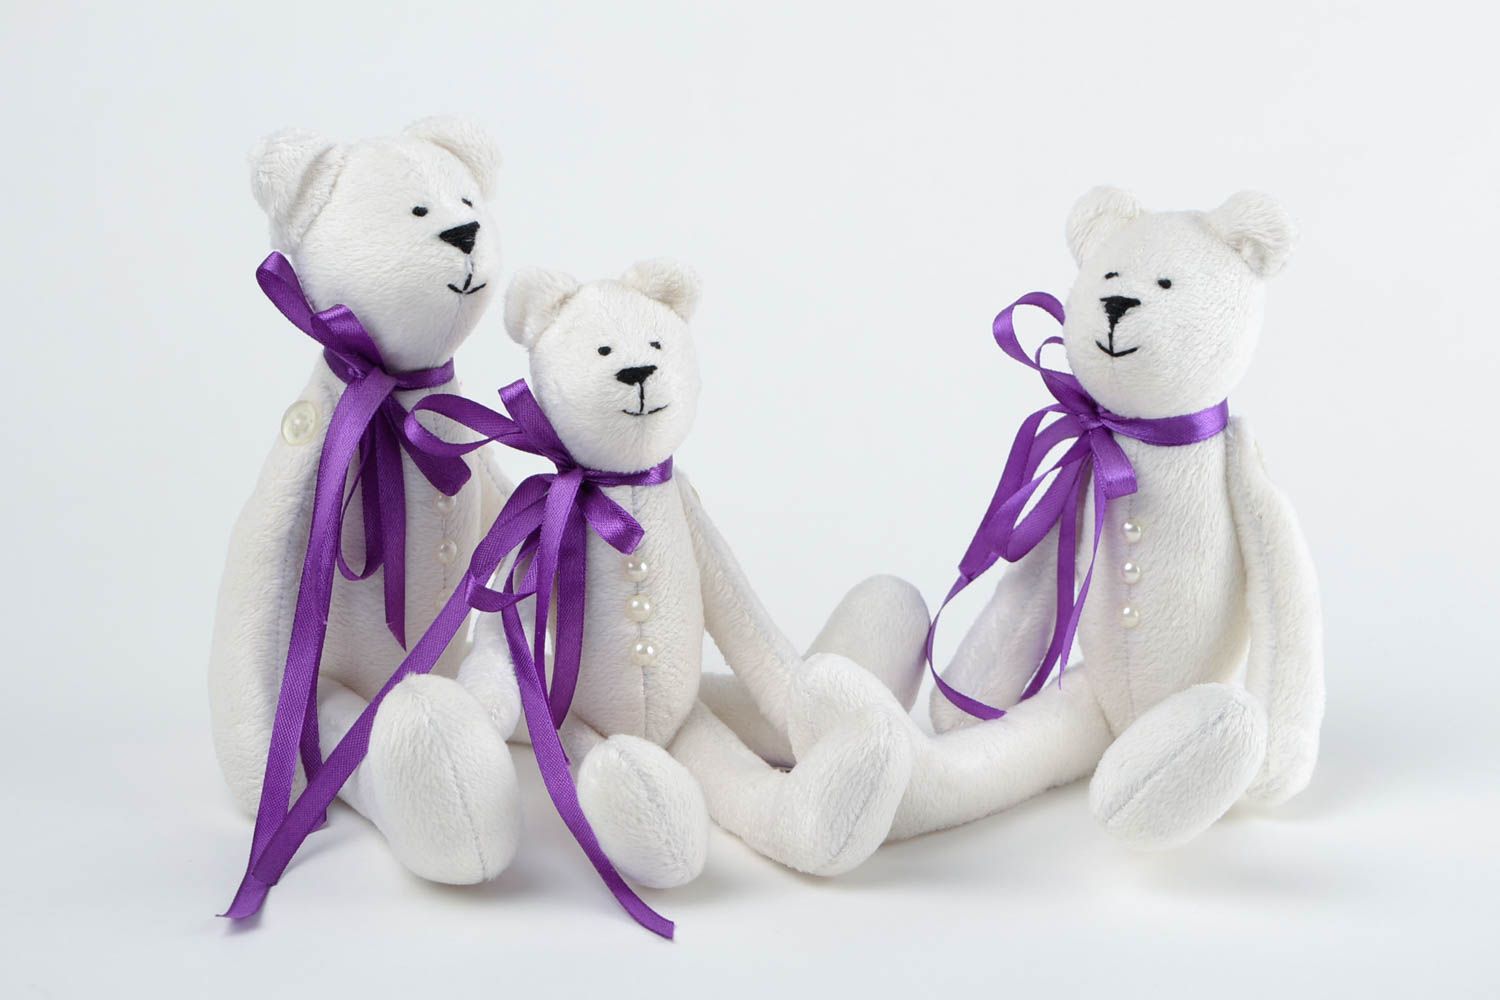 Handmade toys bear toys housewarming gift ideas cool gifts for kids home decor photo 3